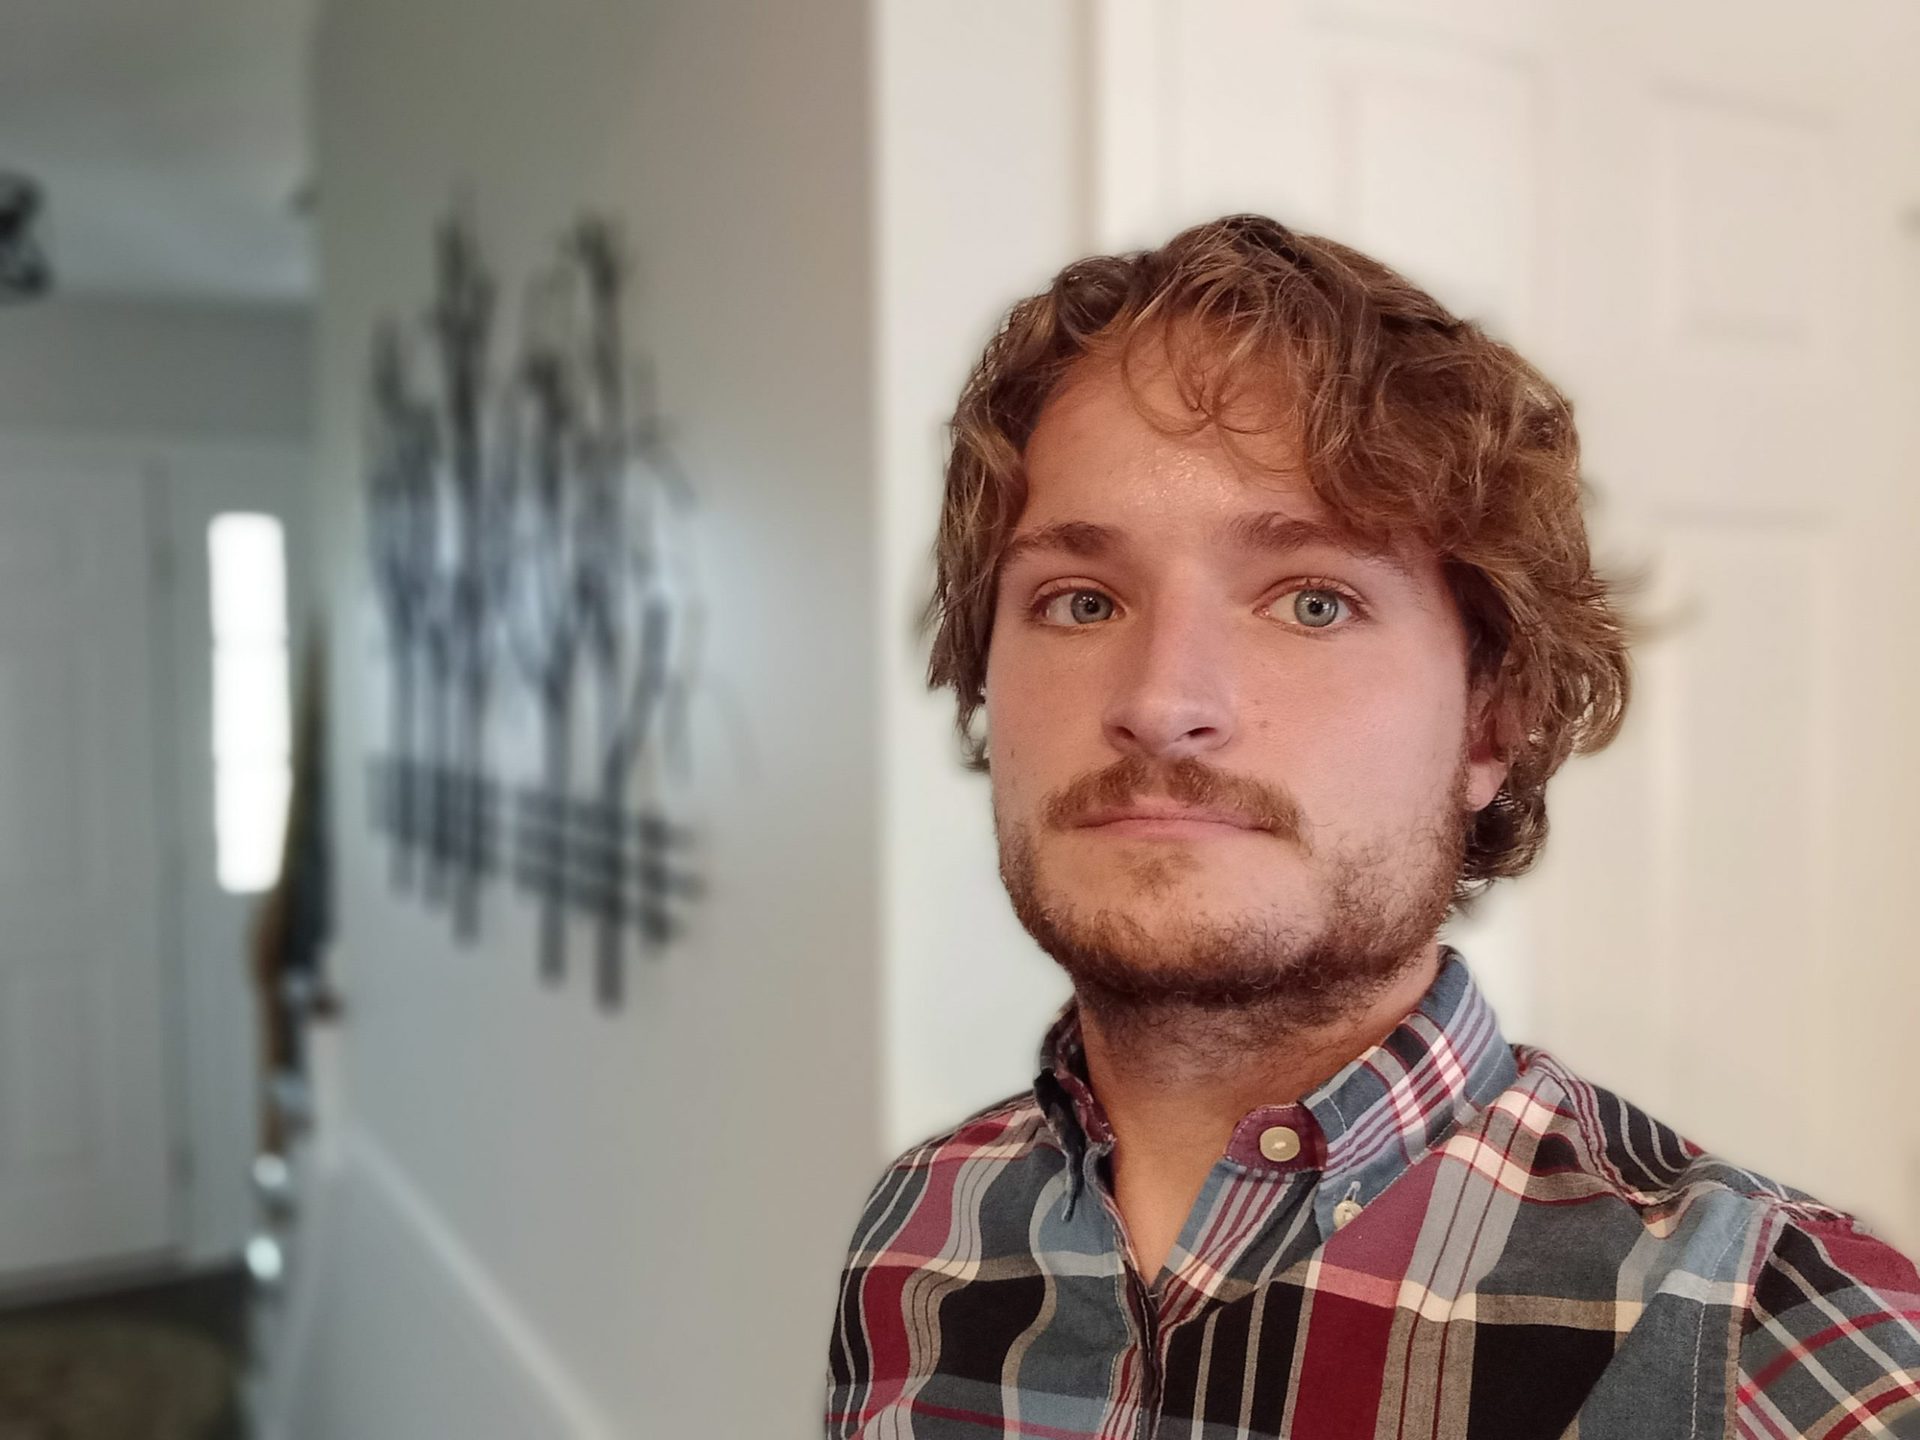 Galaxy a12 portrait selfie of a man with light hair and facial hair, wearing a red and black plaid shirt, taken indoors.